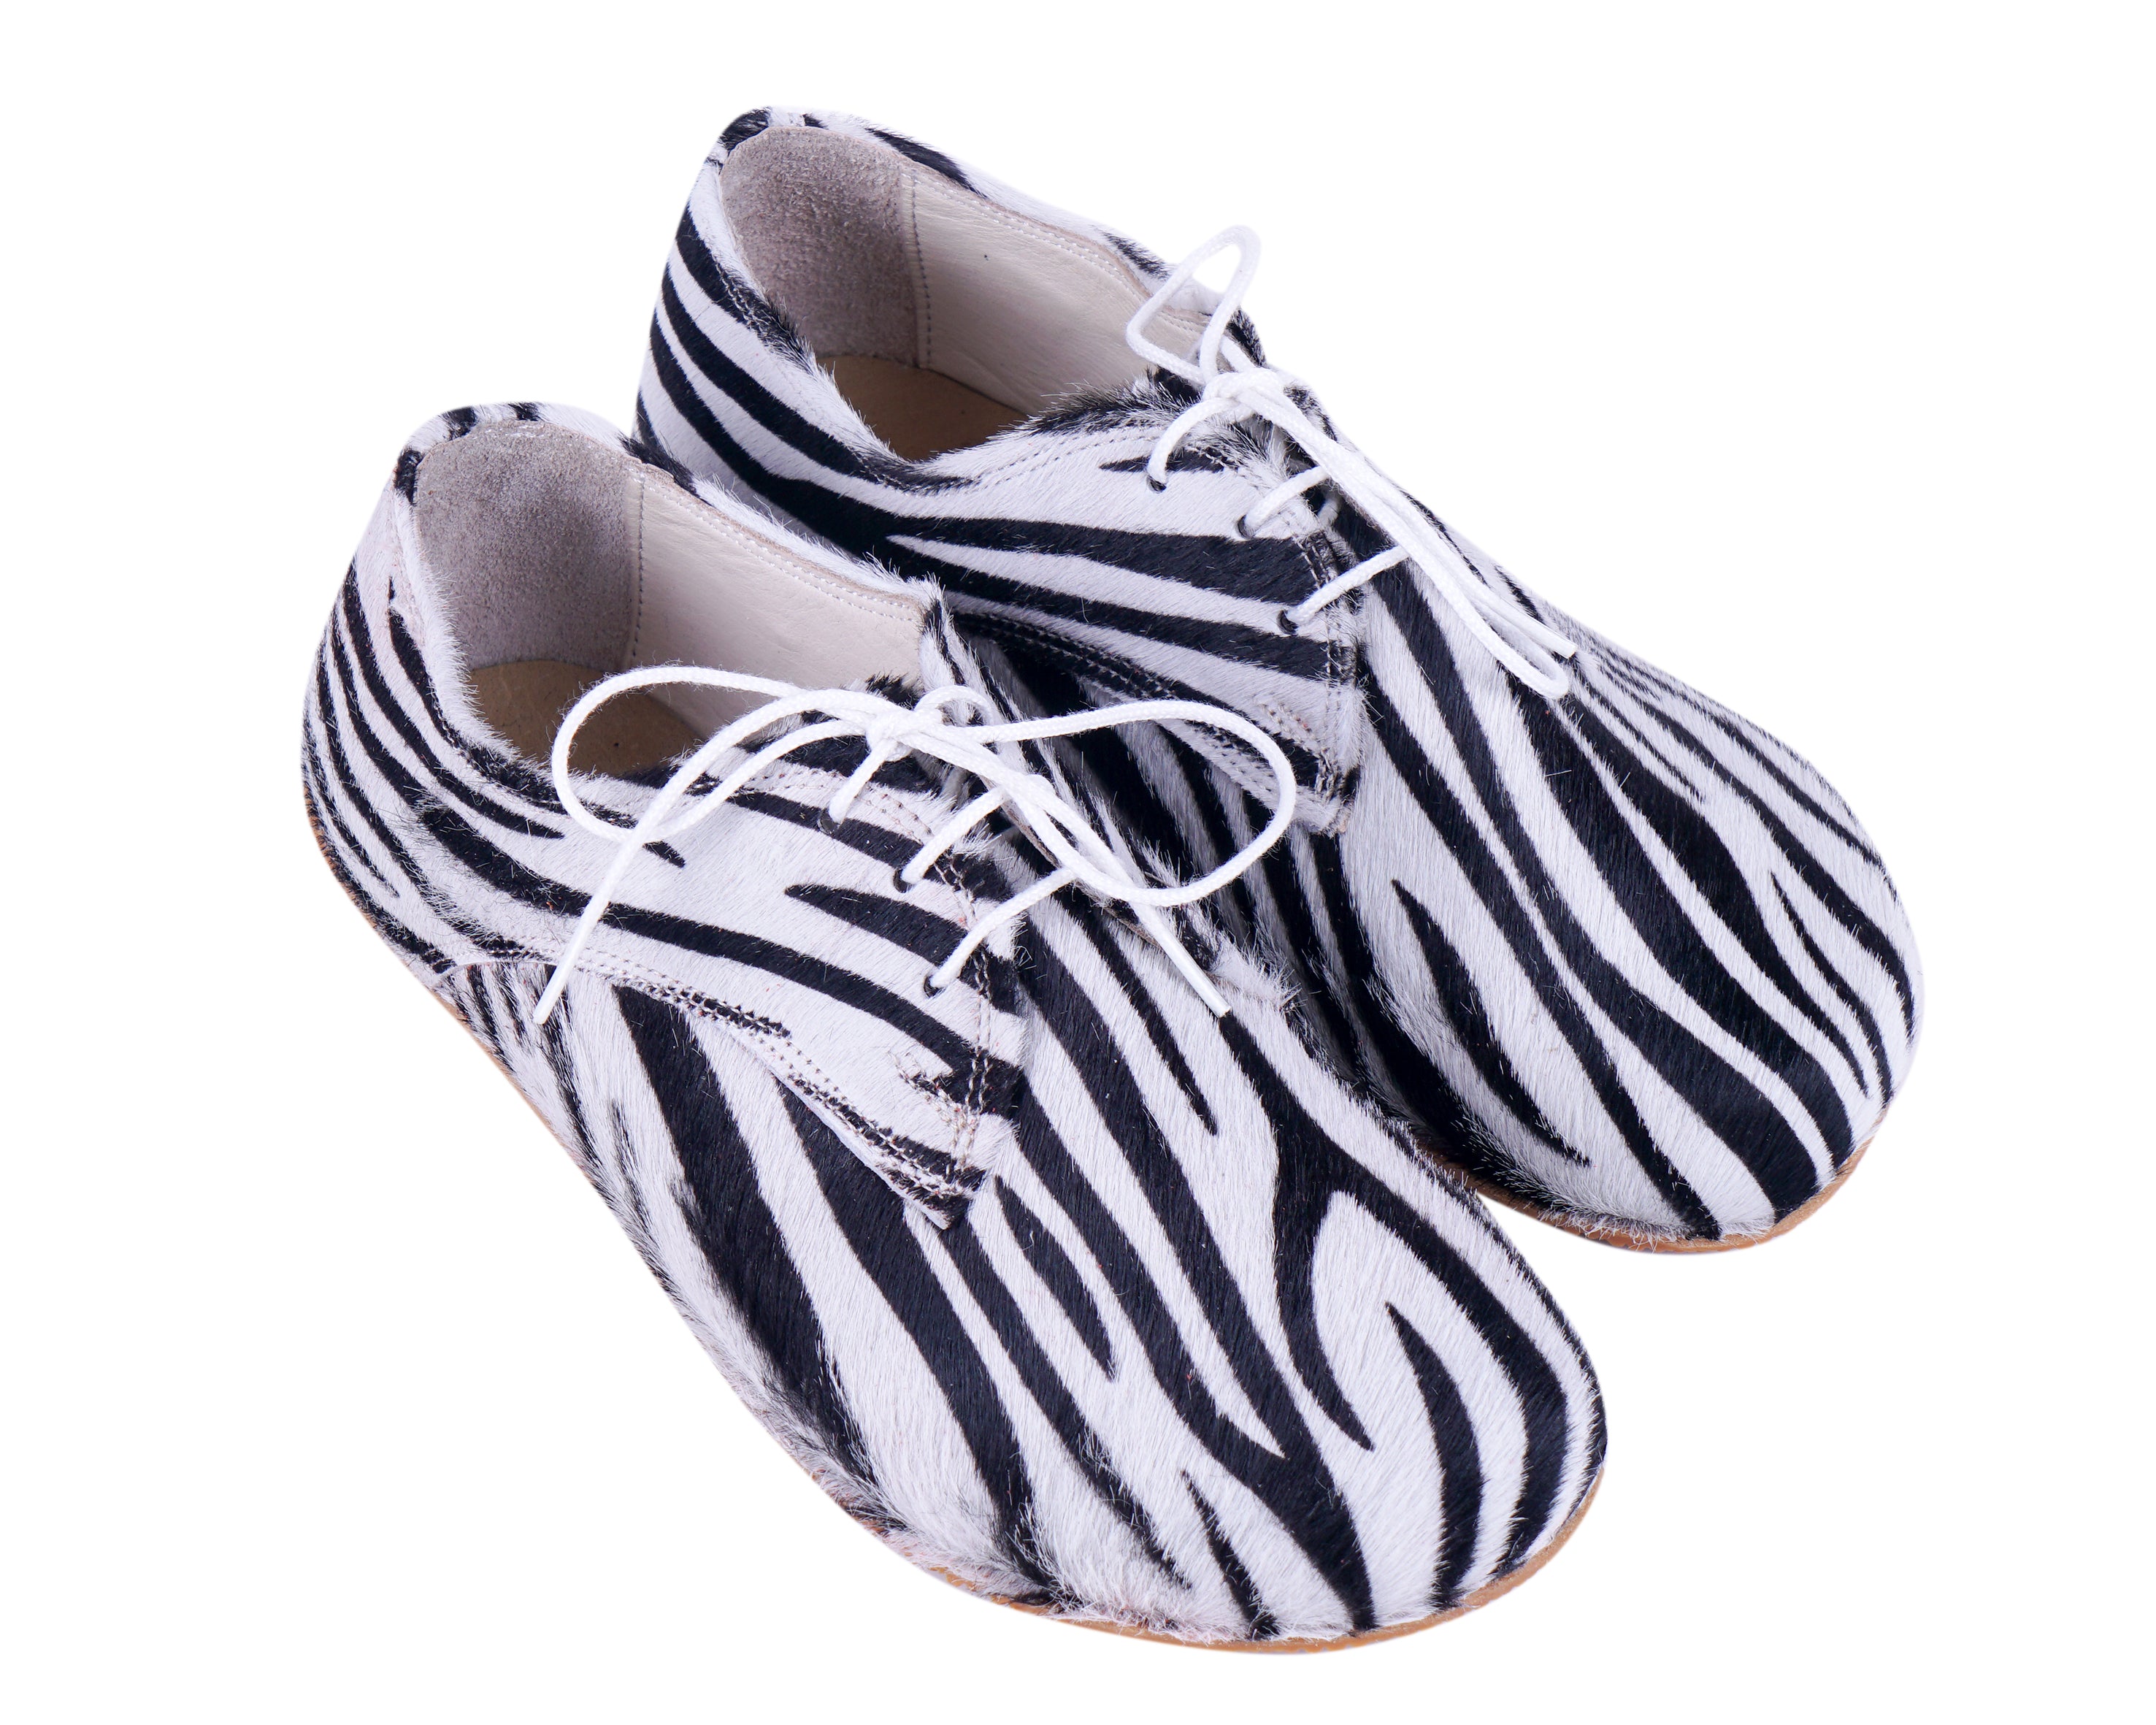 Zebra Oxford Wide Barefoot Shoes Smooth Leather Handmade 4mm Rubber Outsole